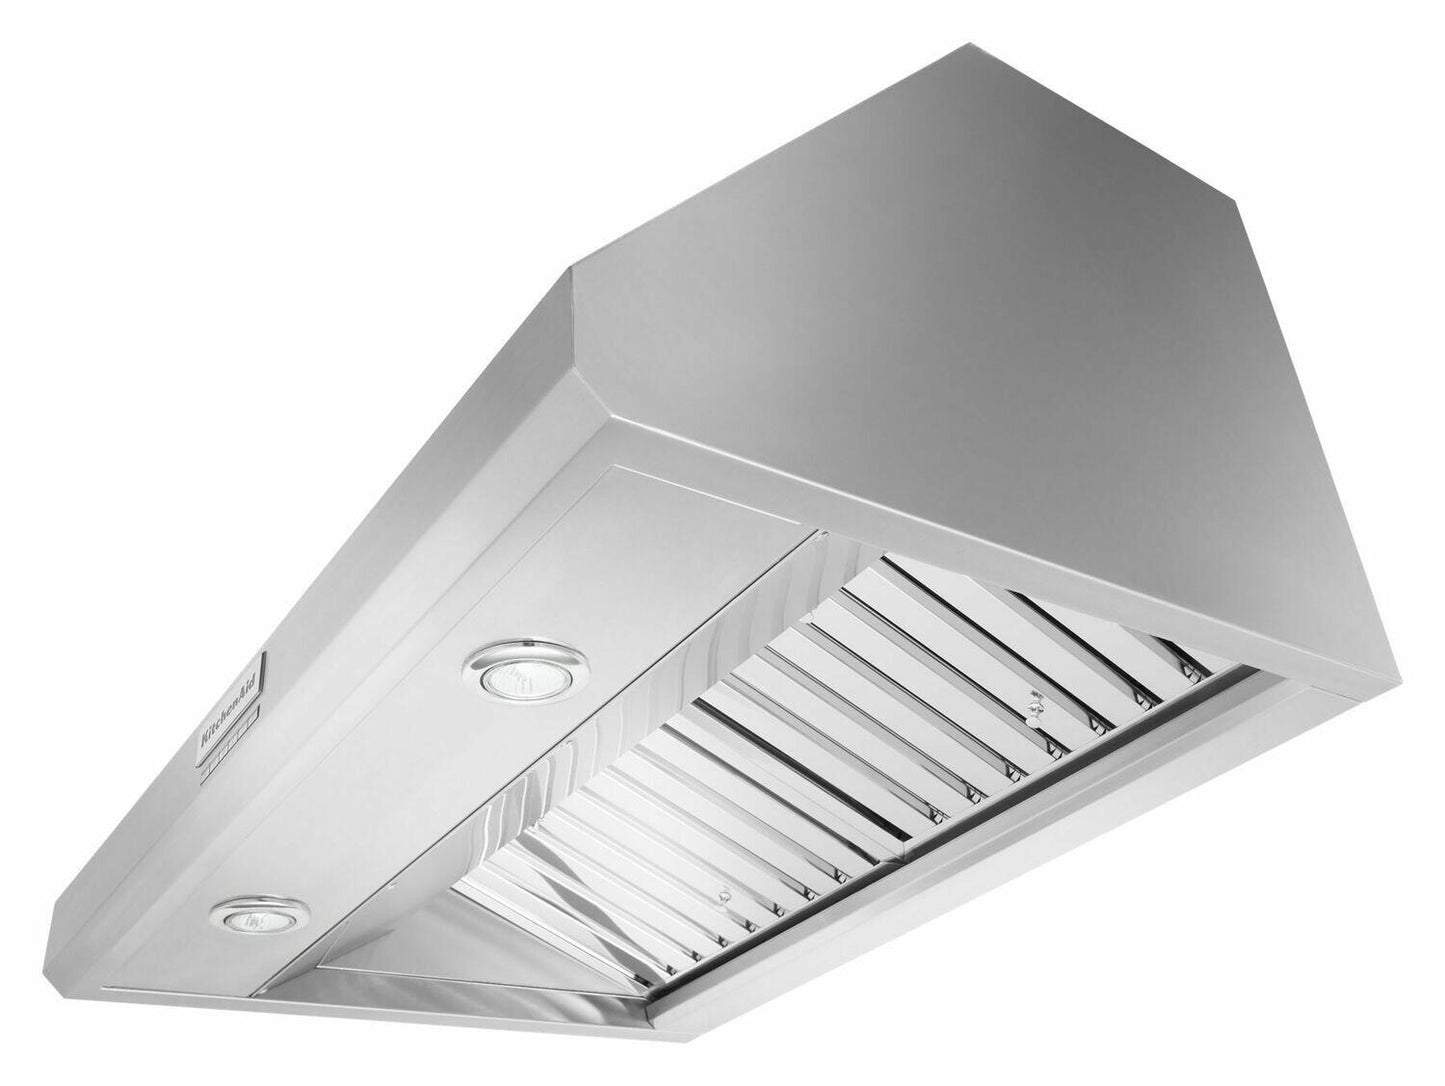 Kitchenaid KVWC906KSS 36" 585 Or 1170 Cfm Motor Class Commercial-Style Wall-Mount Canopy Range Hood - Stainless Steel